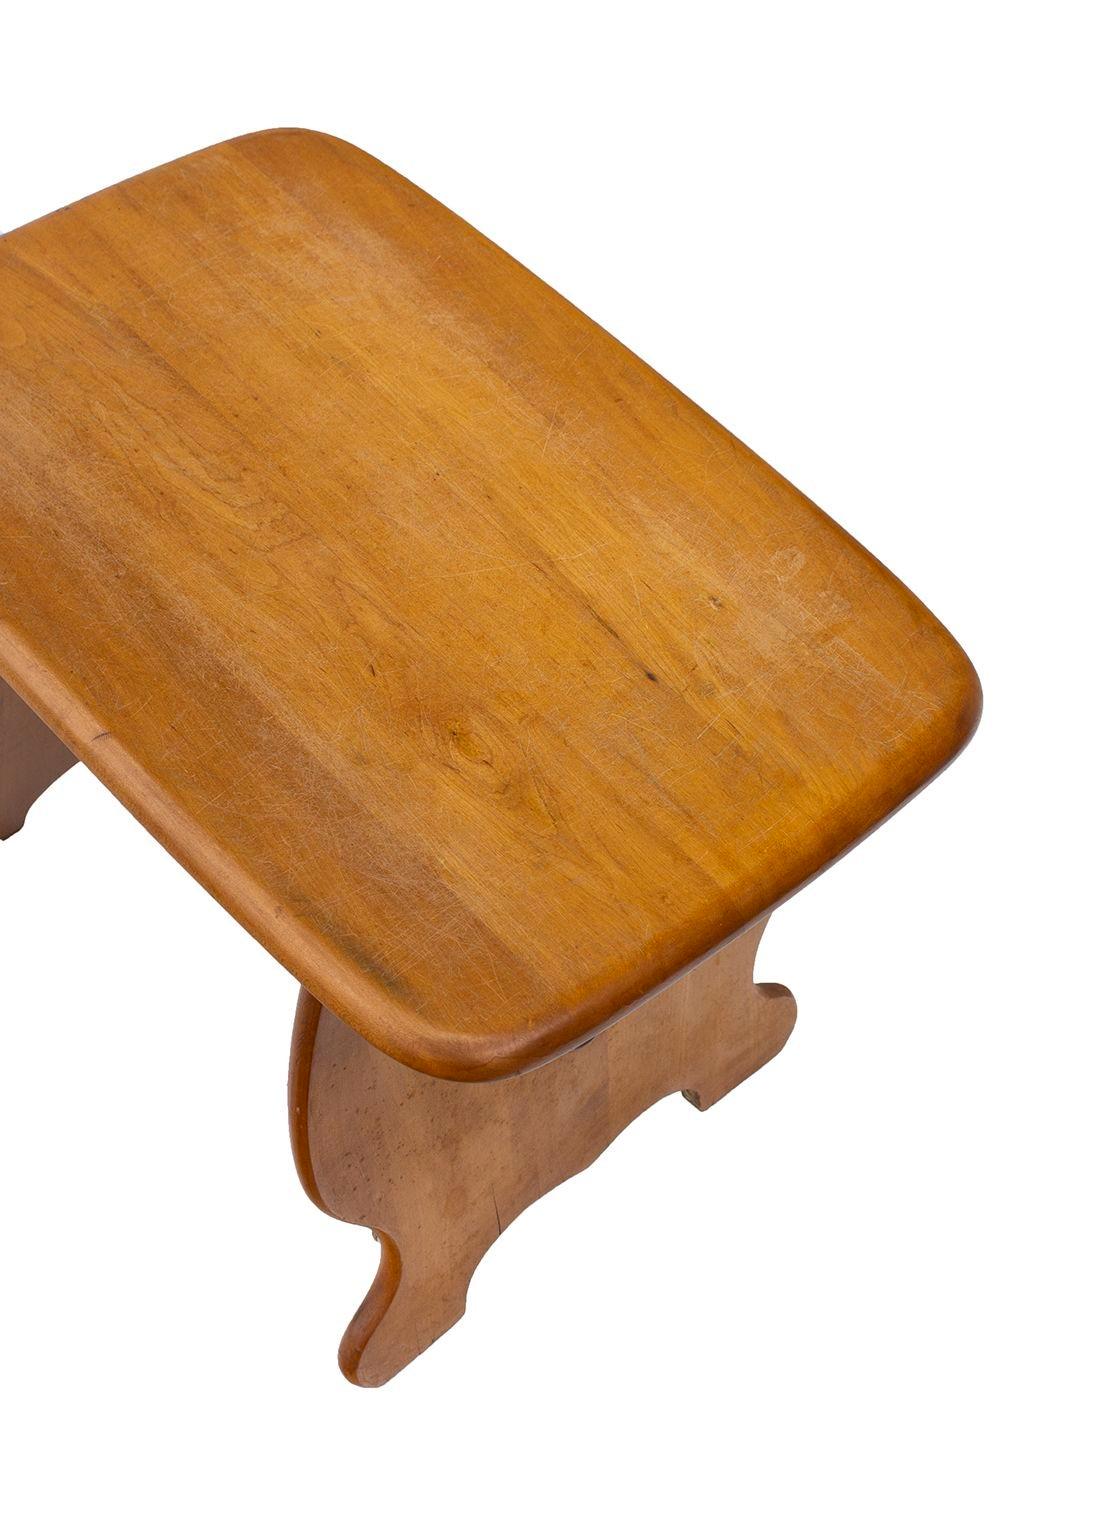 Mid-20th Century Whimsical Solid Maple Bench or Stool For Sale